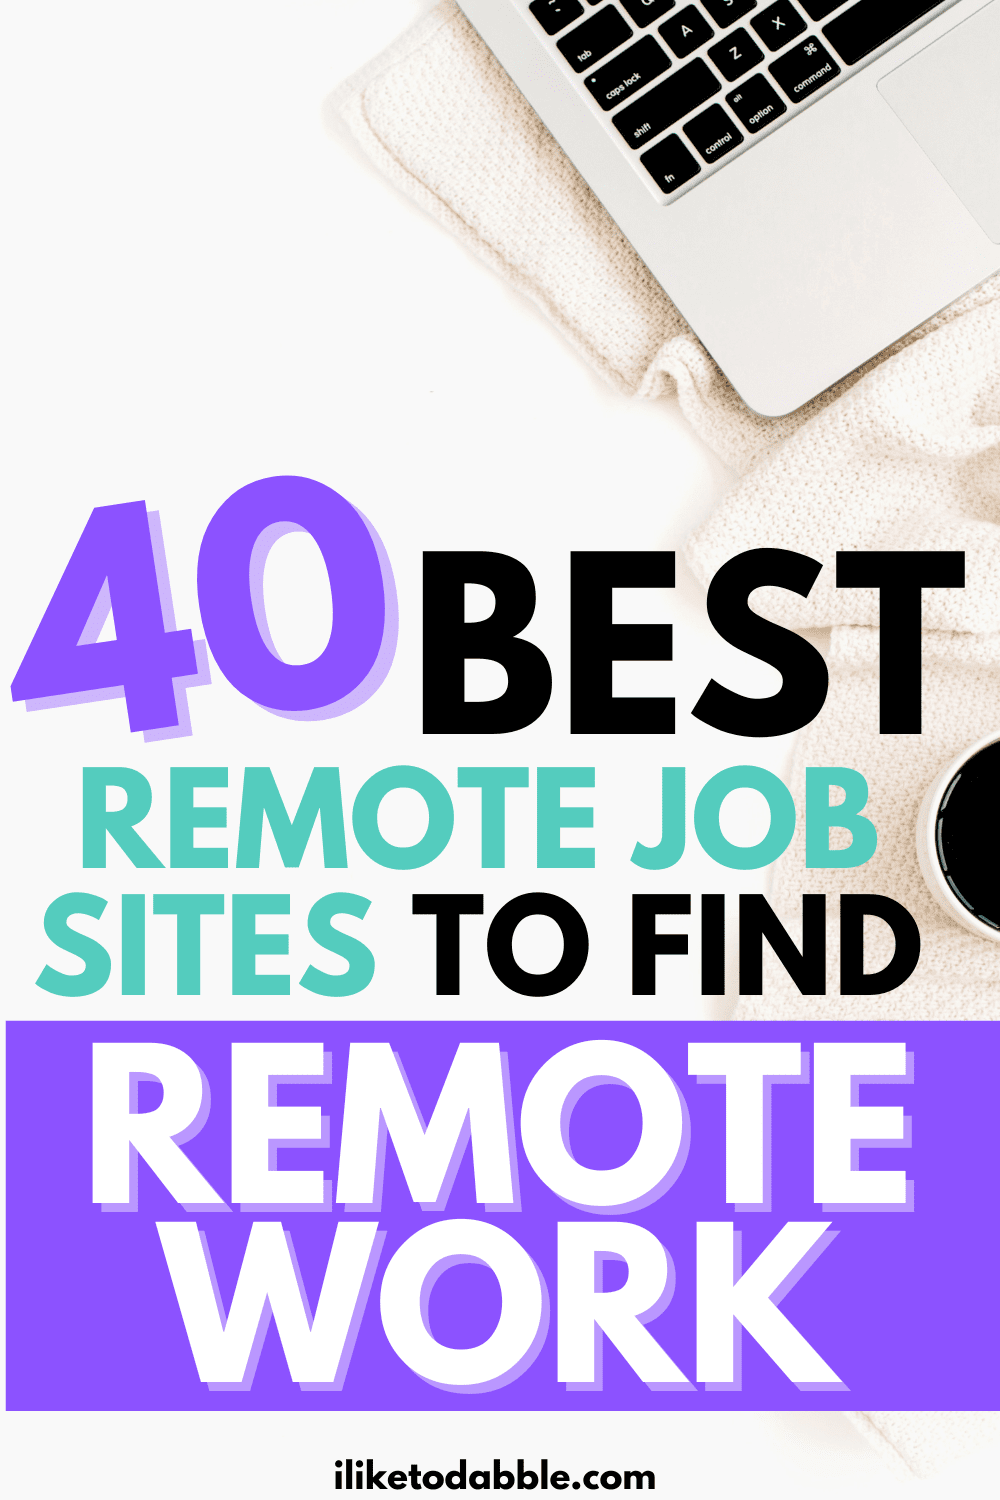 best remote job boards pinnable image with a laptop on a desk with coffee and title text overlay that reads 40 best remote job sites to find remote work